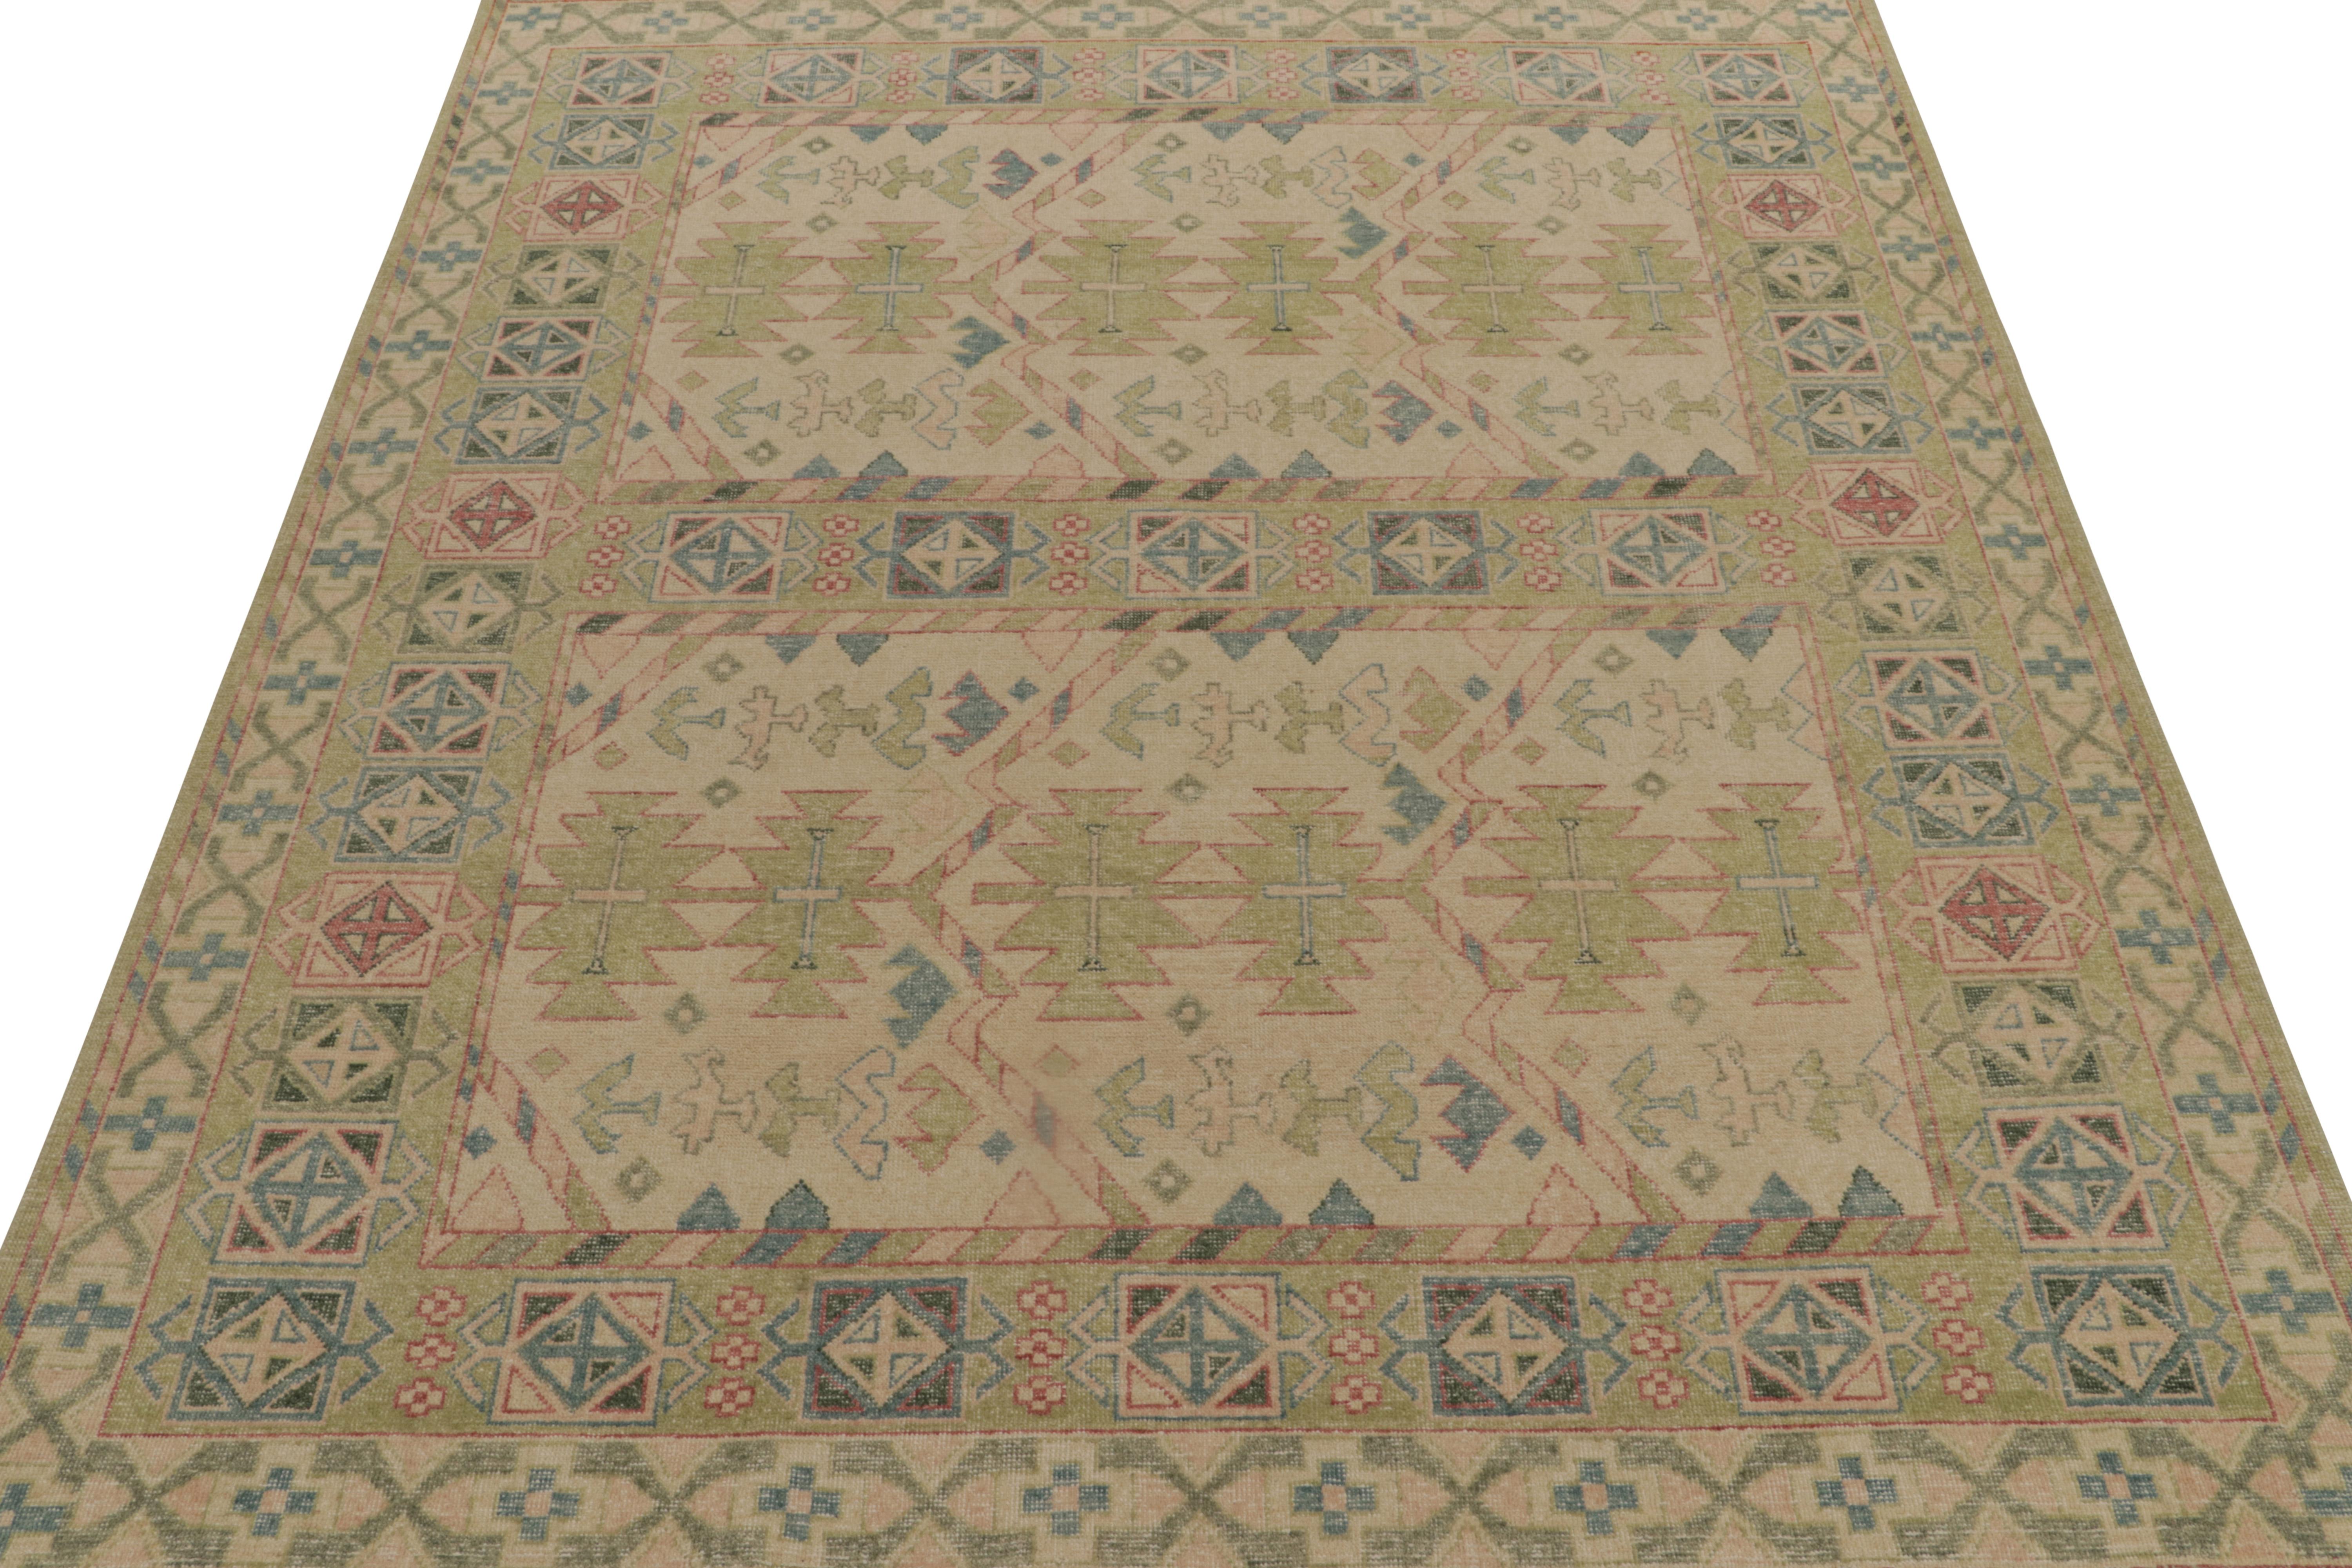 Indian Rug & Kilim’s Distressed Style Rug in Green, Pink and Blue Tribal Patterns For Sale